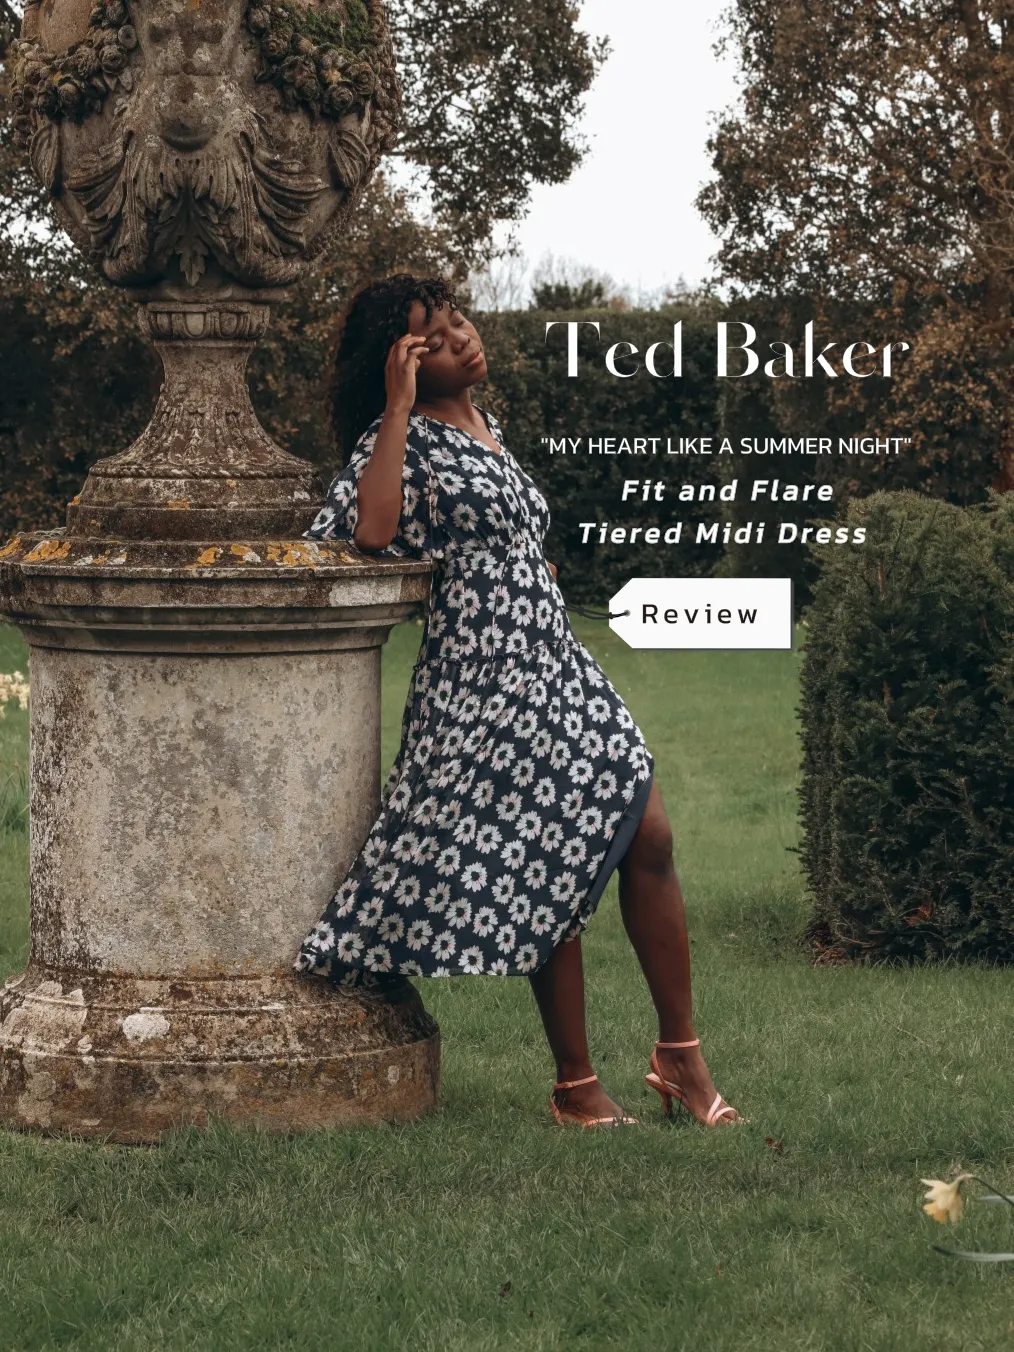 Ted Baker Dress Review, Gallery posted by illyanalondon